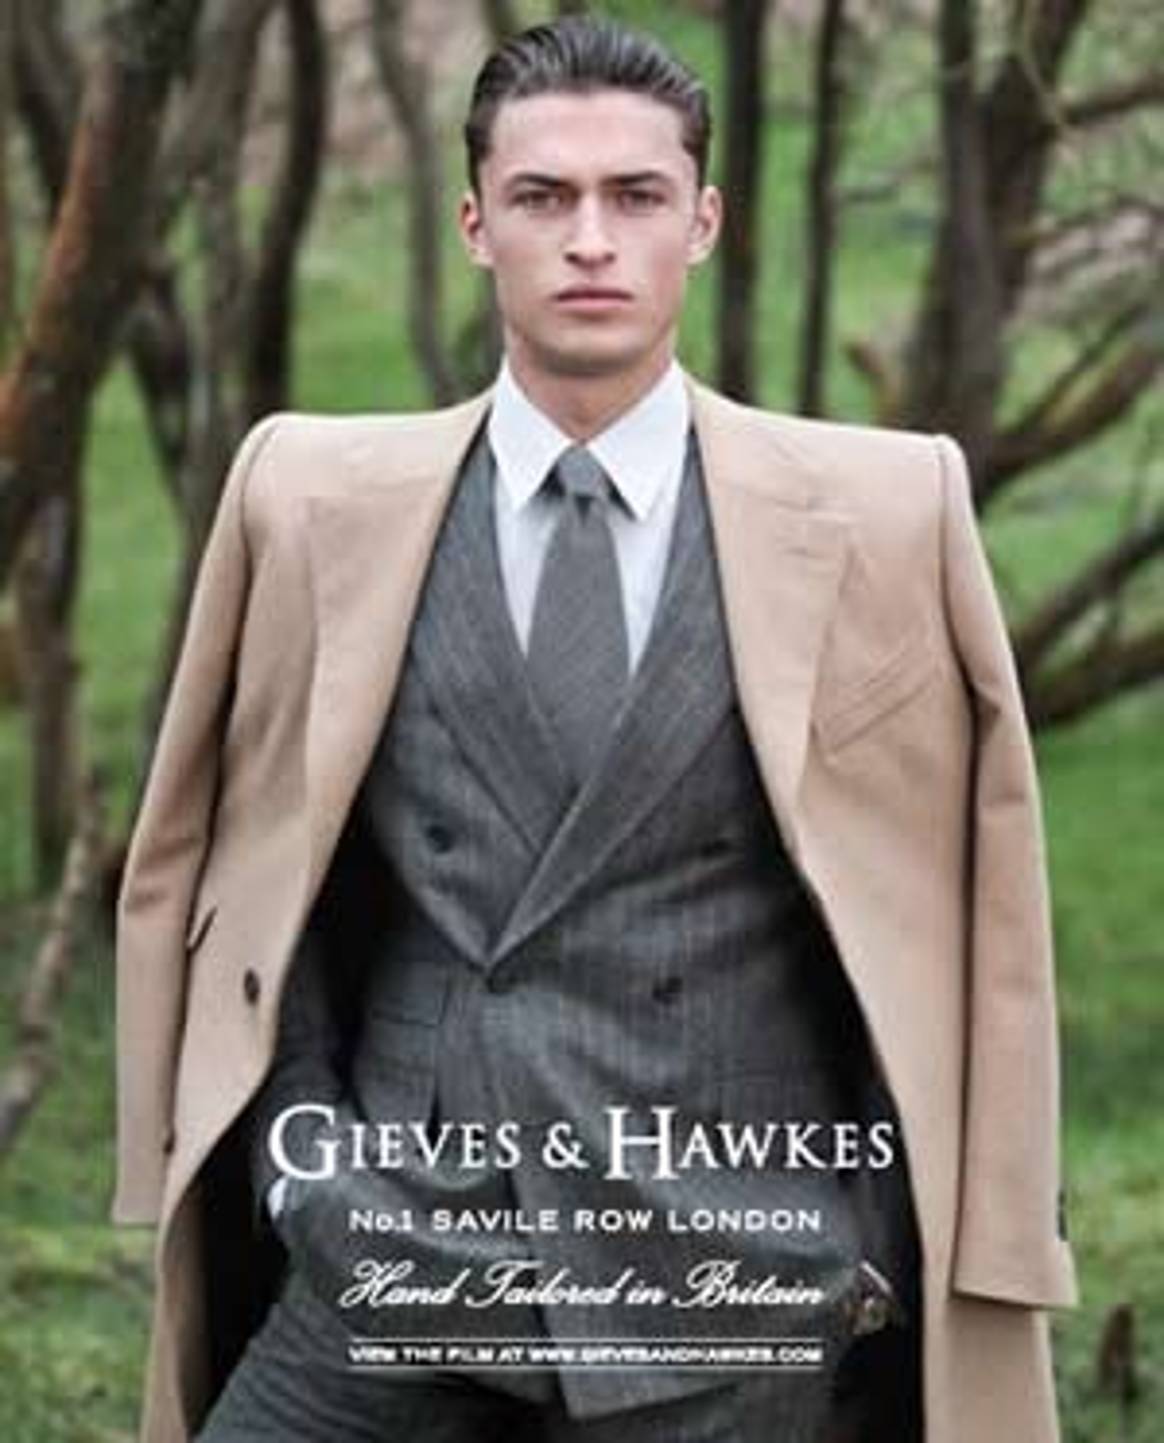 Gieves & Hawkes partners with Woolmark in China